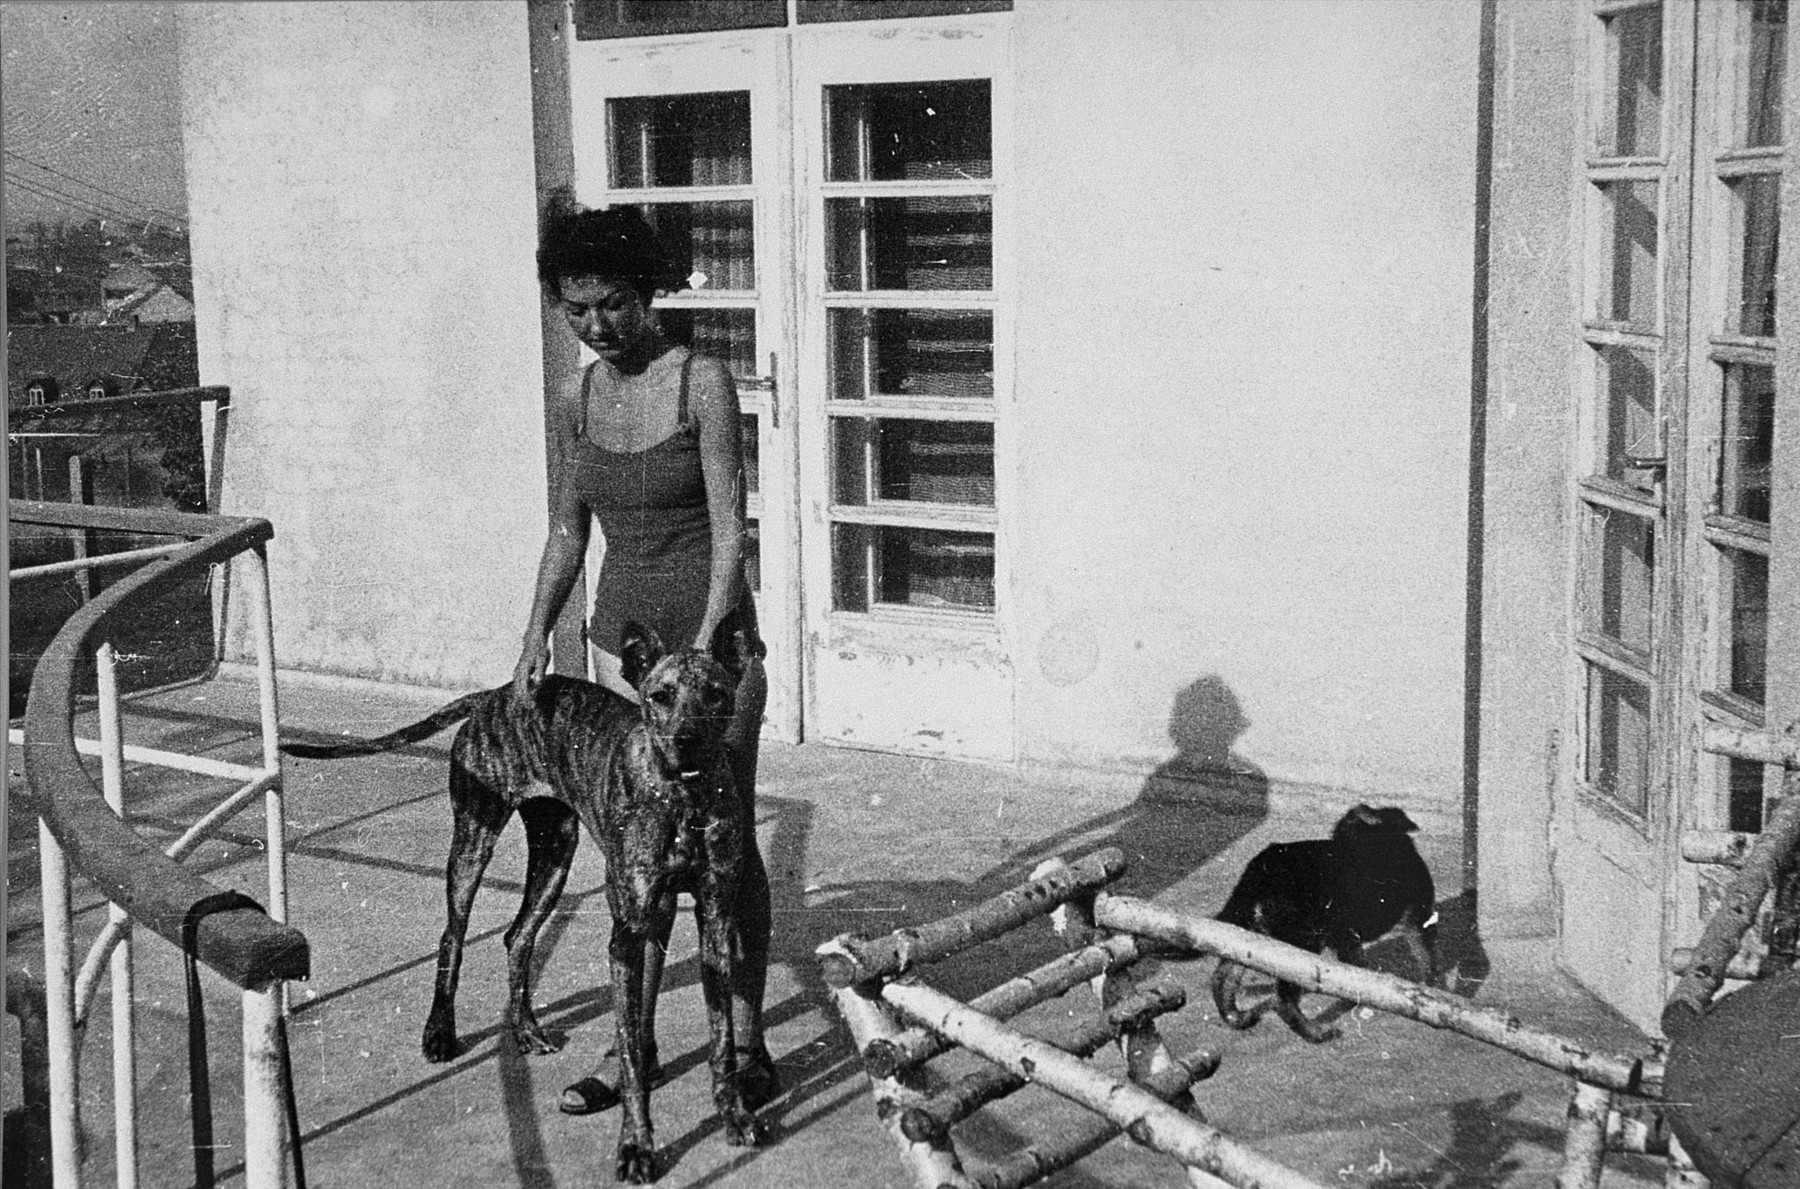 Majola, the mistress of commandant Amon Goeth, stands on the balcony of his villa in the Plaszow concentration camp with his dog Ralf.